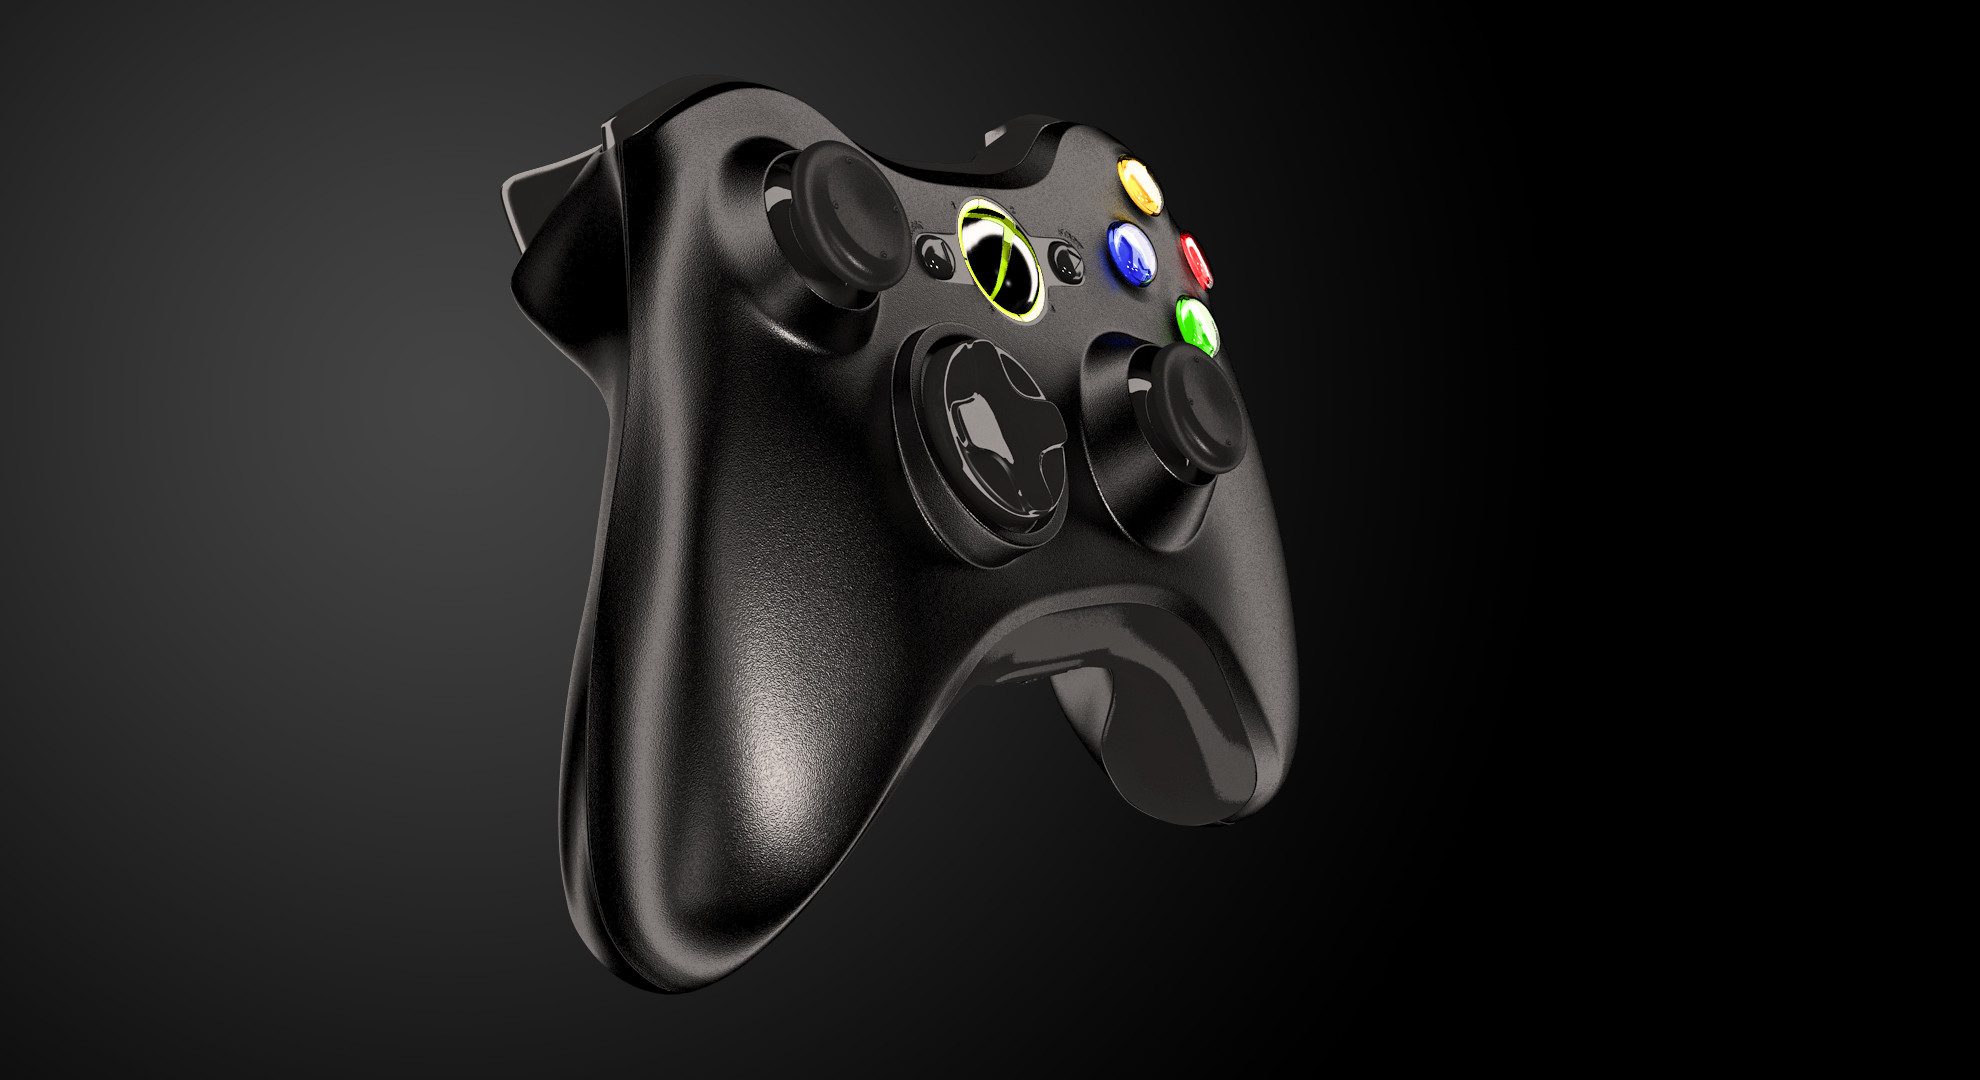 1980x1080 ... Xbox 360 Controller WIP Perspective by Artistic-Kage